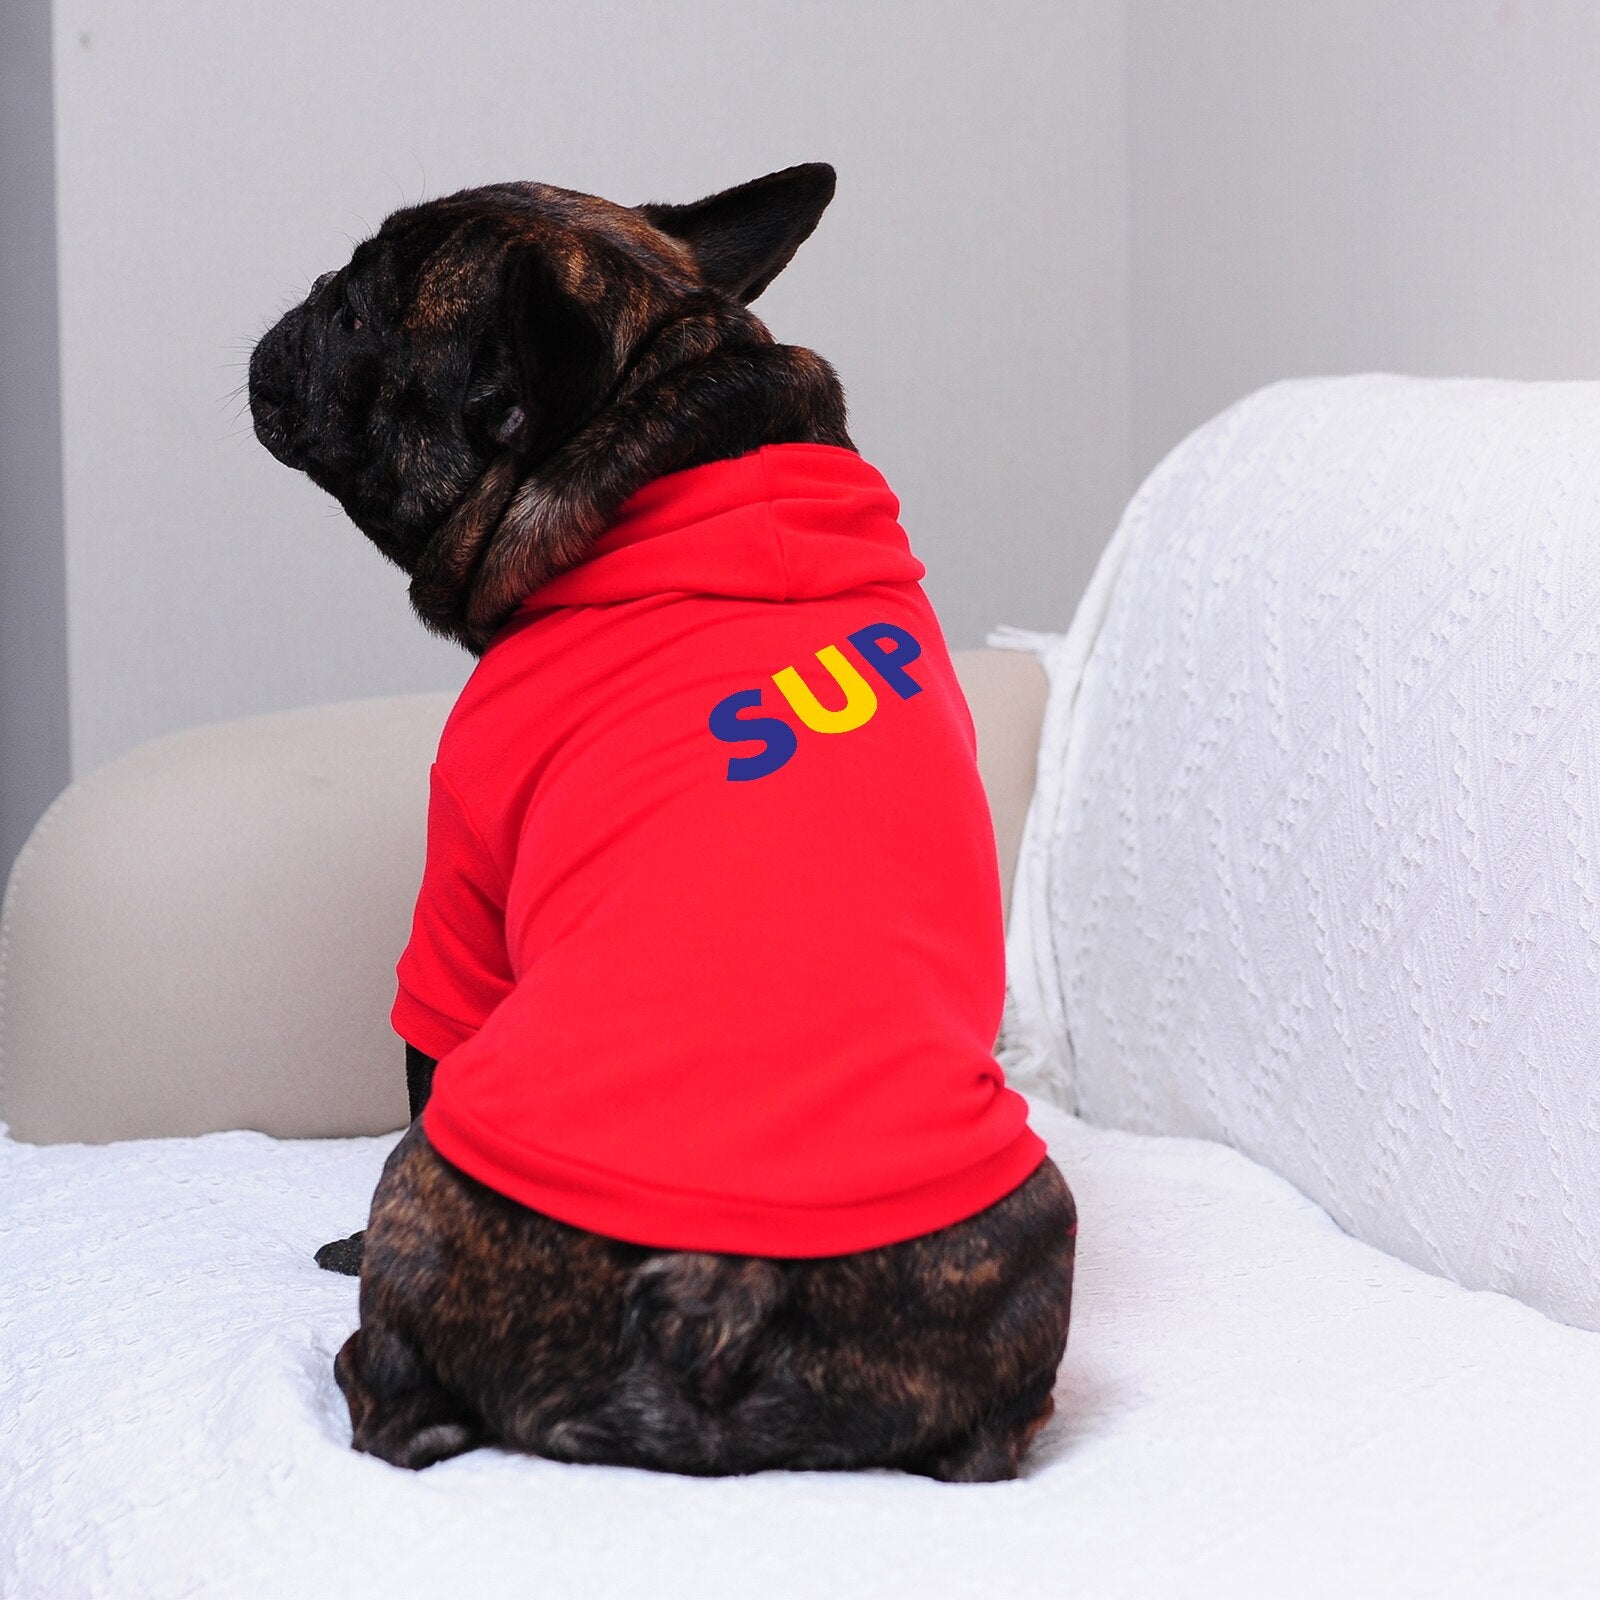 Hoodies for Puppies Small Dogs Girl and Boy Pet Leash Hole and Letter Printed Design Cotton 2022 New Arrival